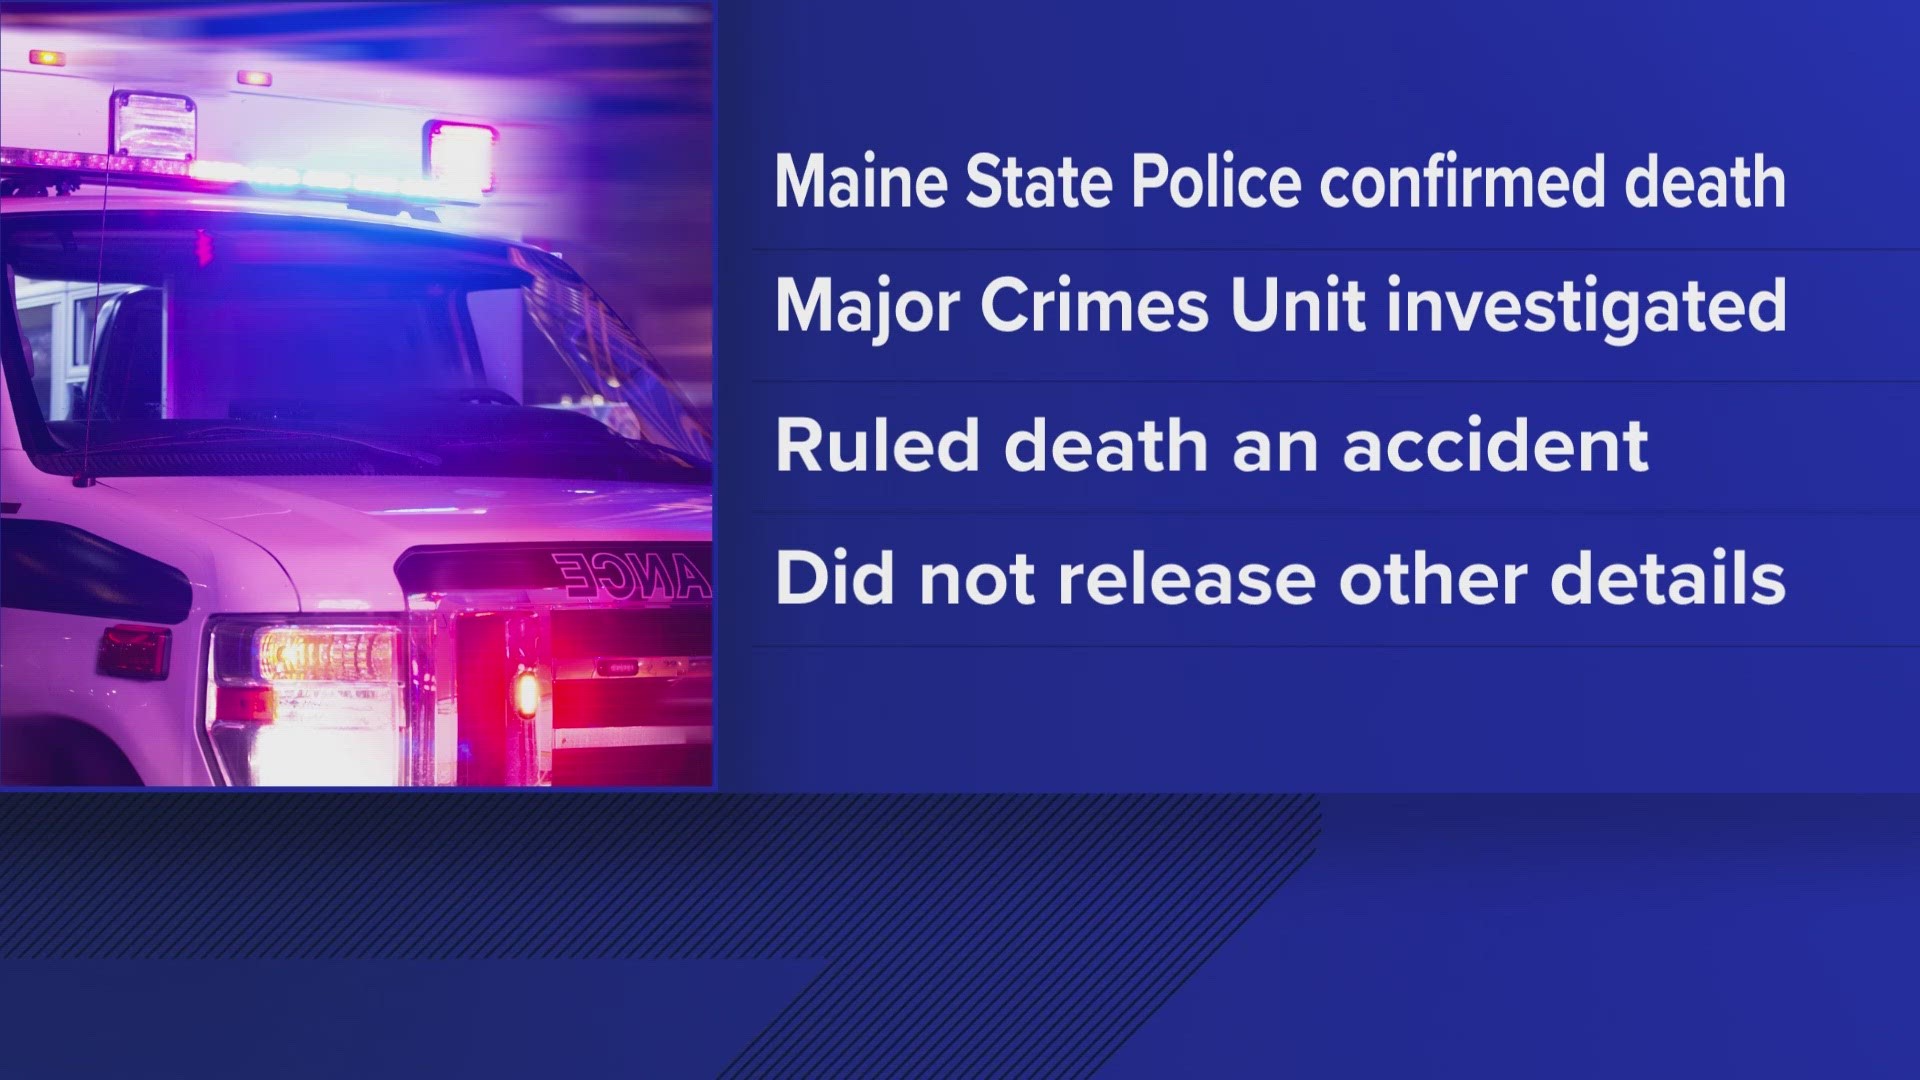 Maine State Police said its major crimes units has ruled this death accidental.